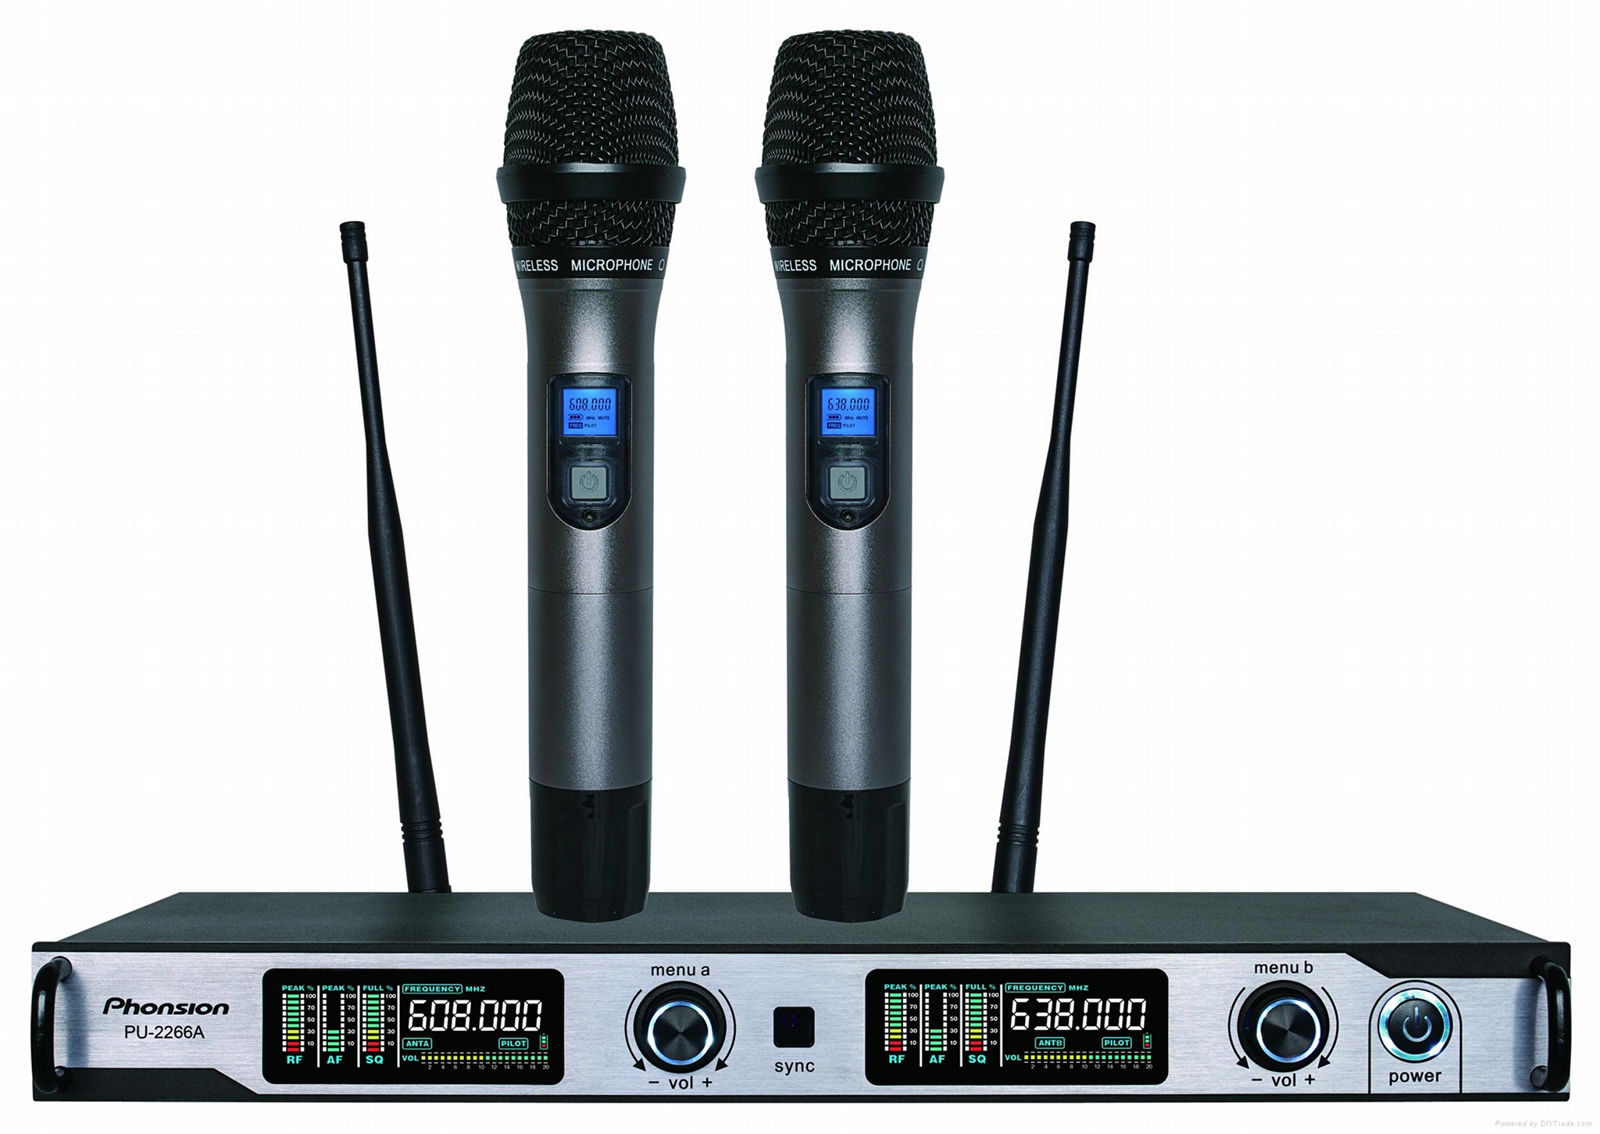 Digital UHF Wireless Microphone with smart mute function